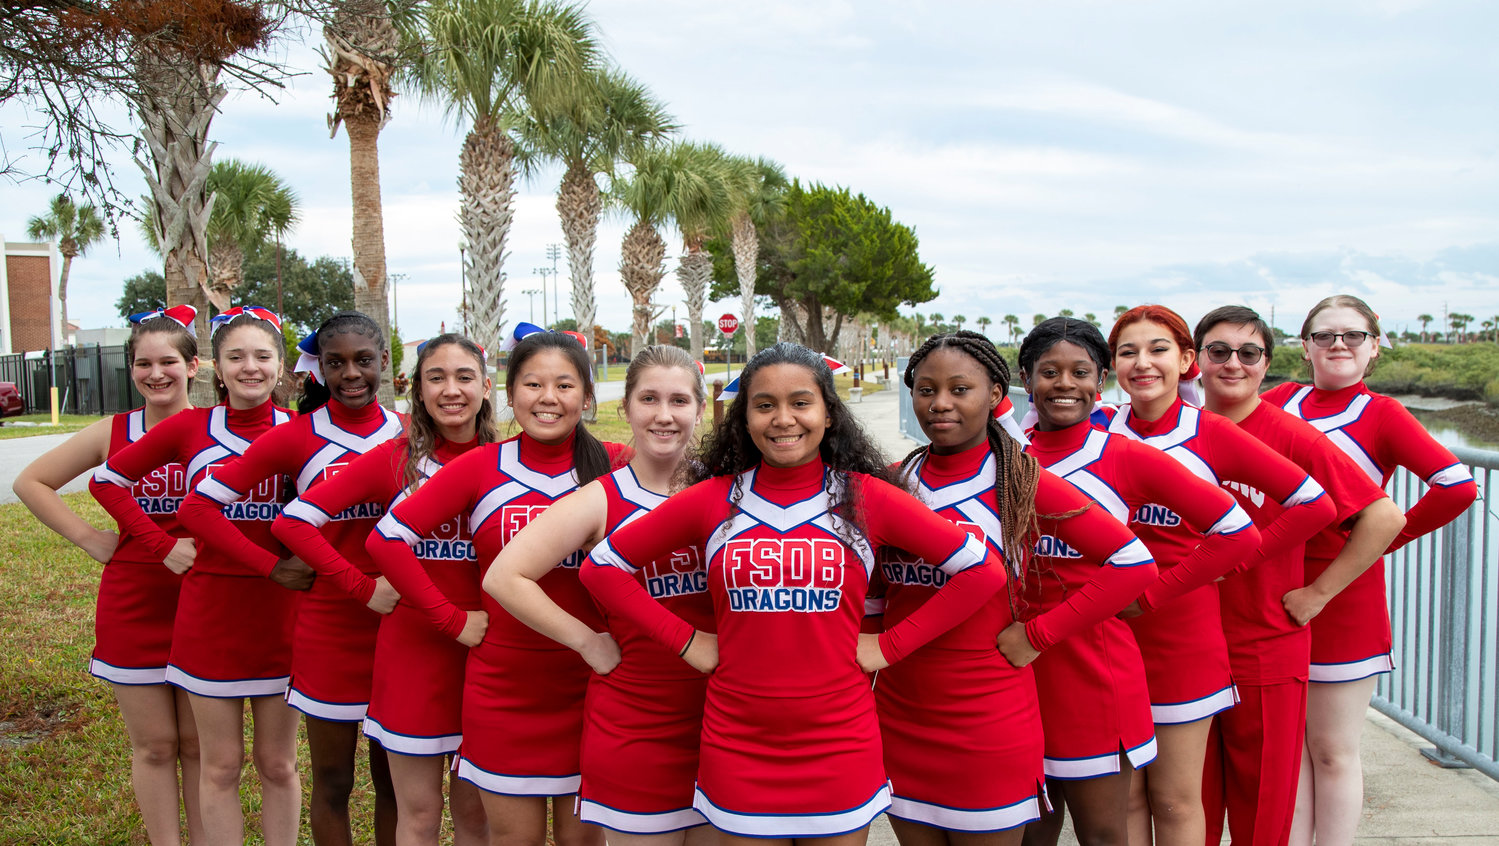 The FSDB cheerleaders made it all the way to the state competition this year. Thanks to a charitable donation from THE PLAYERS, the team was able to get new uniforms and practice mats